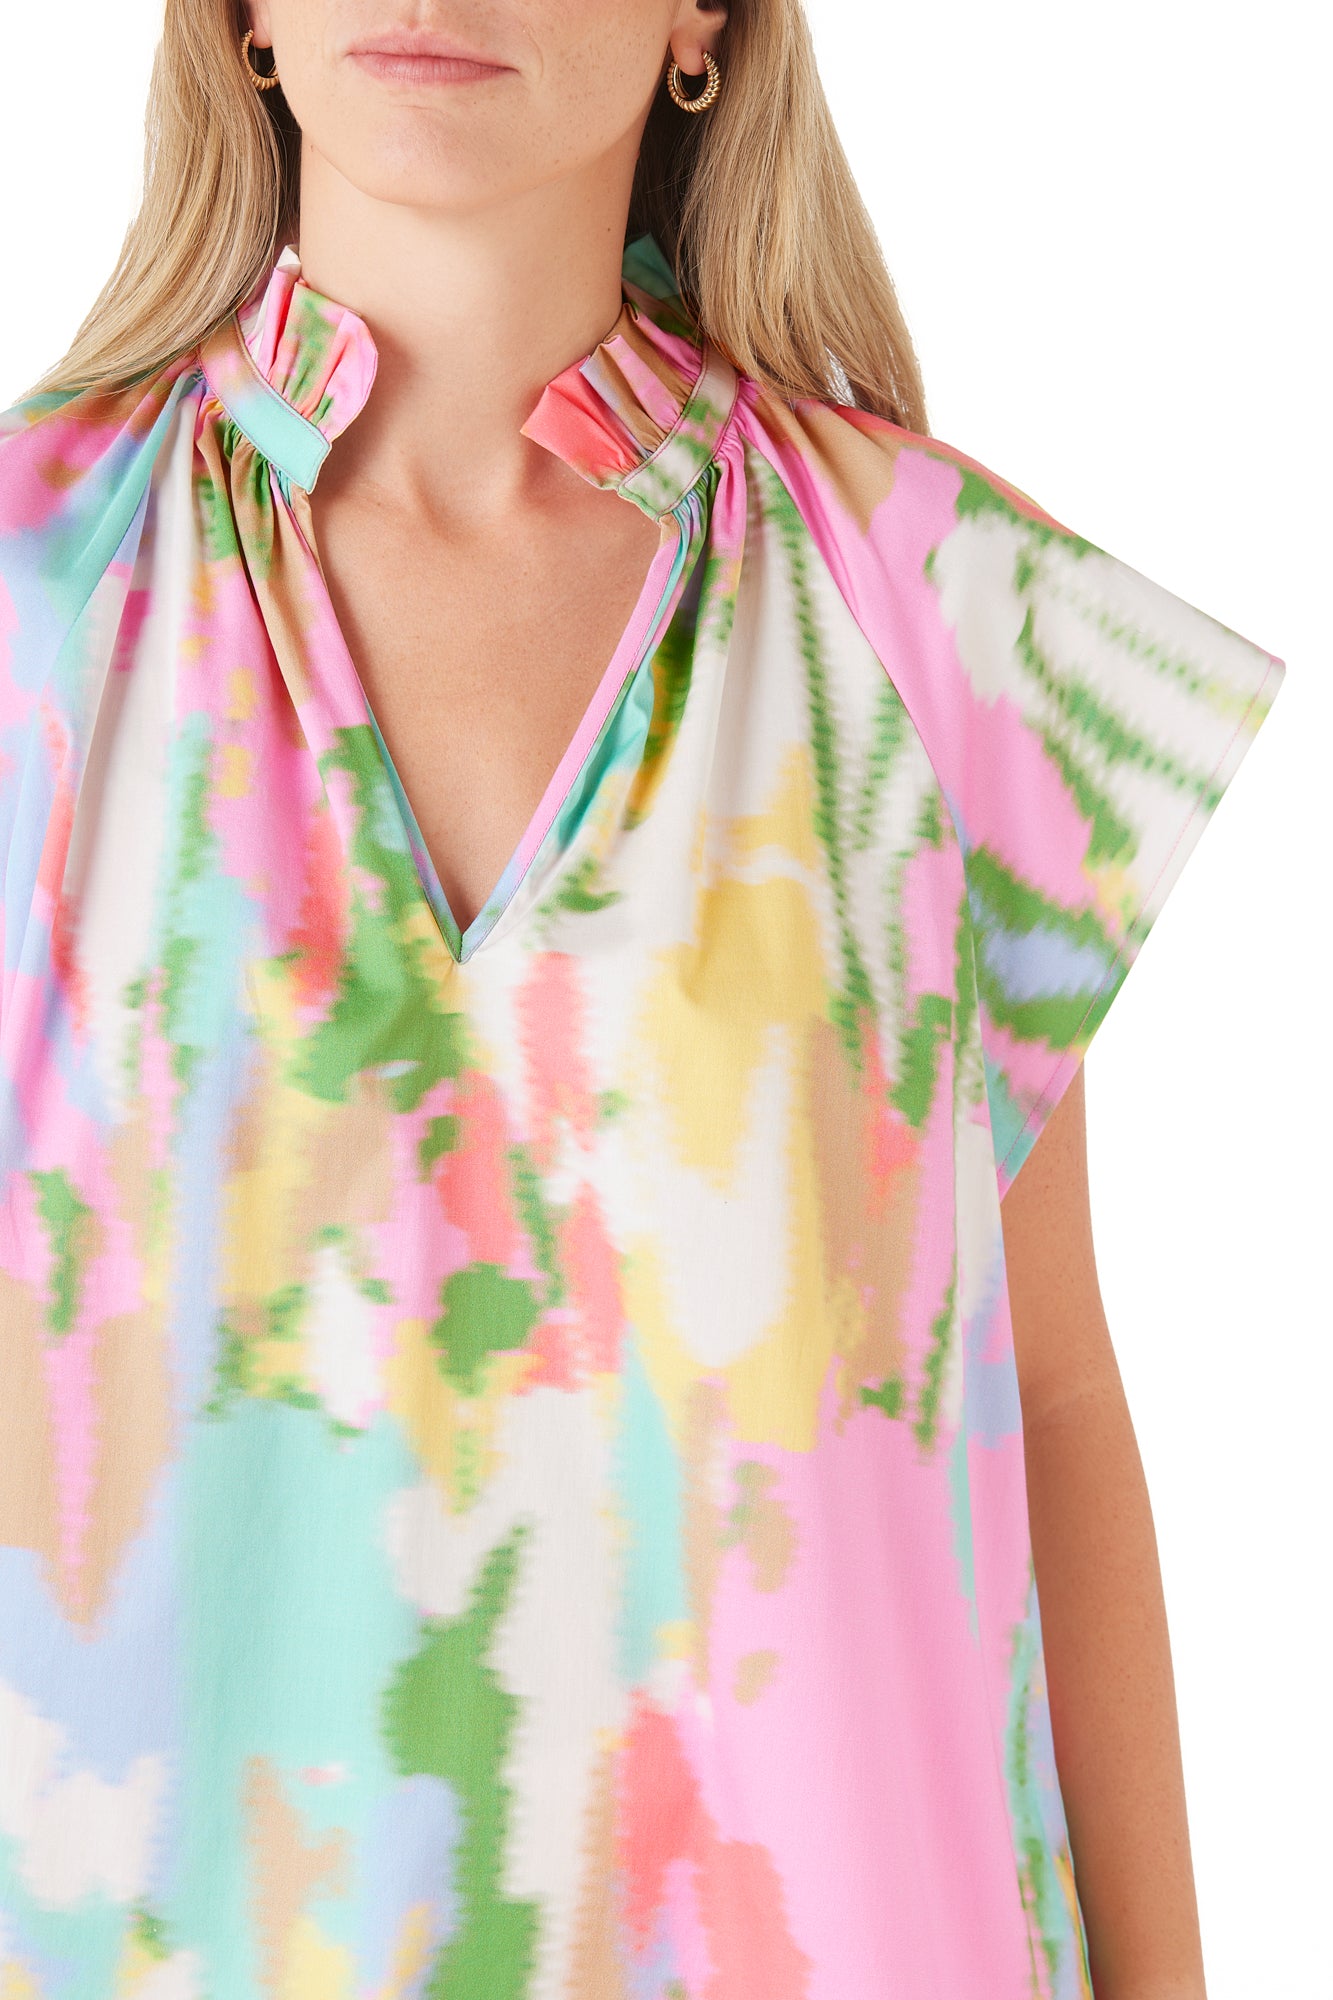 Crosby Wilkes Top Cape Floral